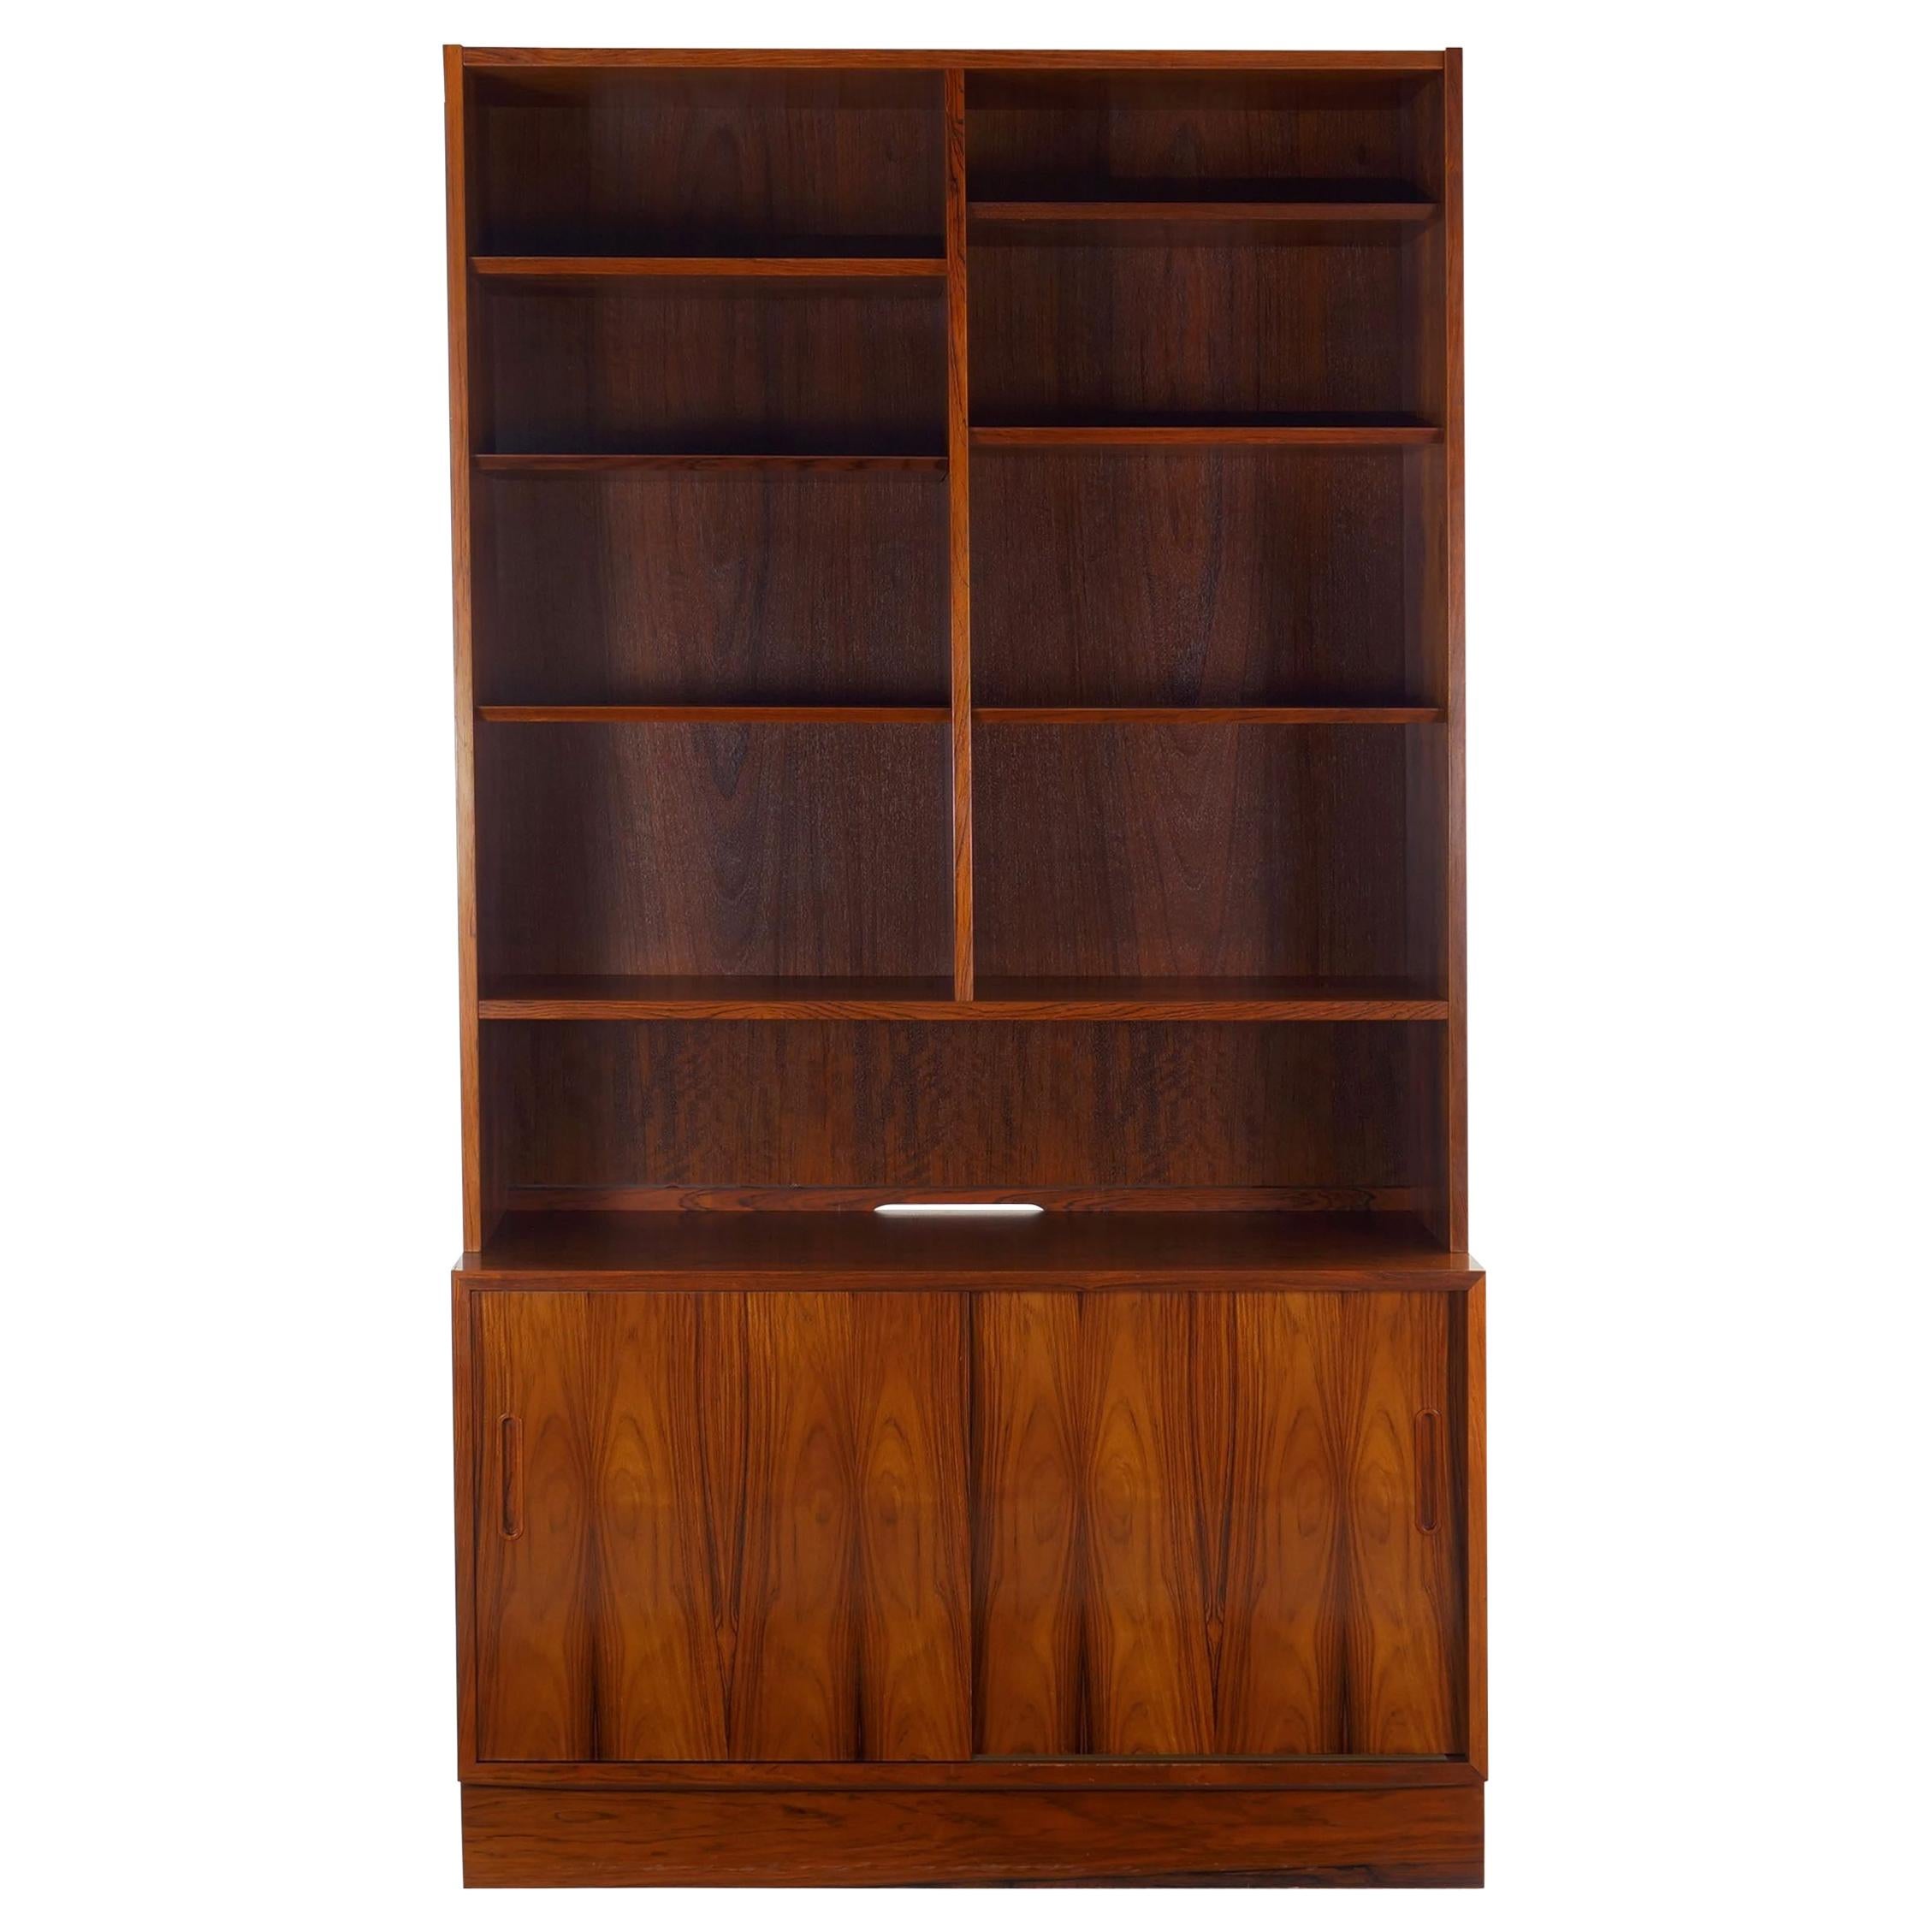 Danish Mid-Century Modern Rosewood Bookcase over Cabinet by Poul Hundevad